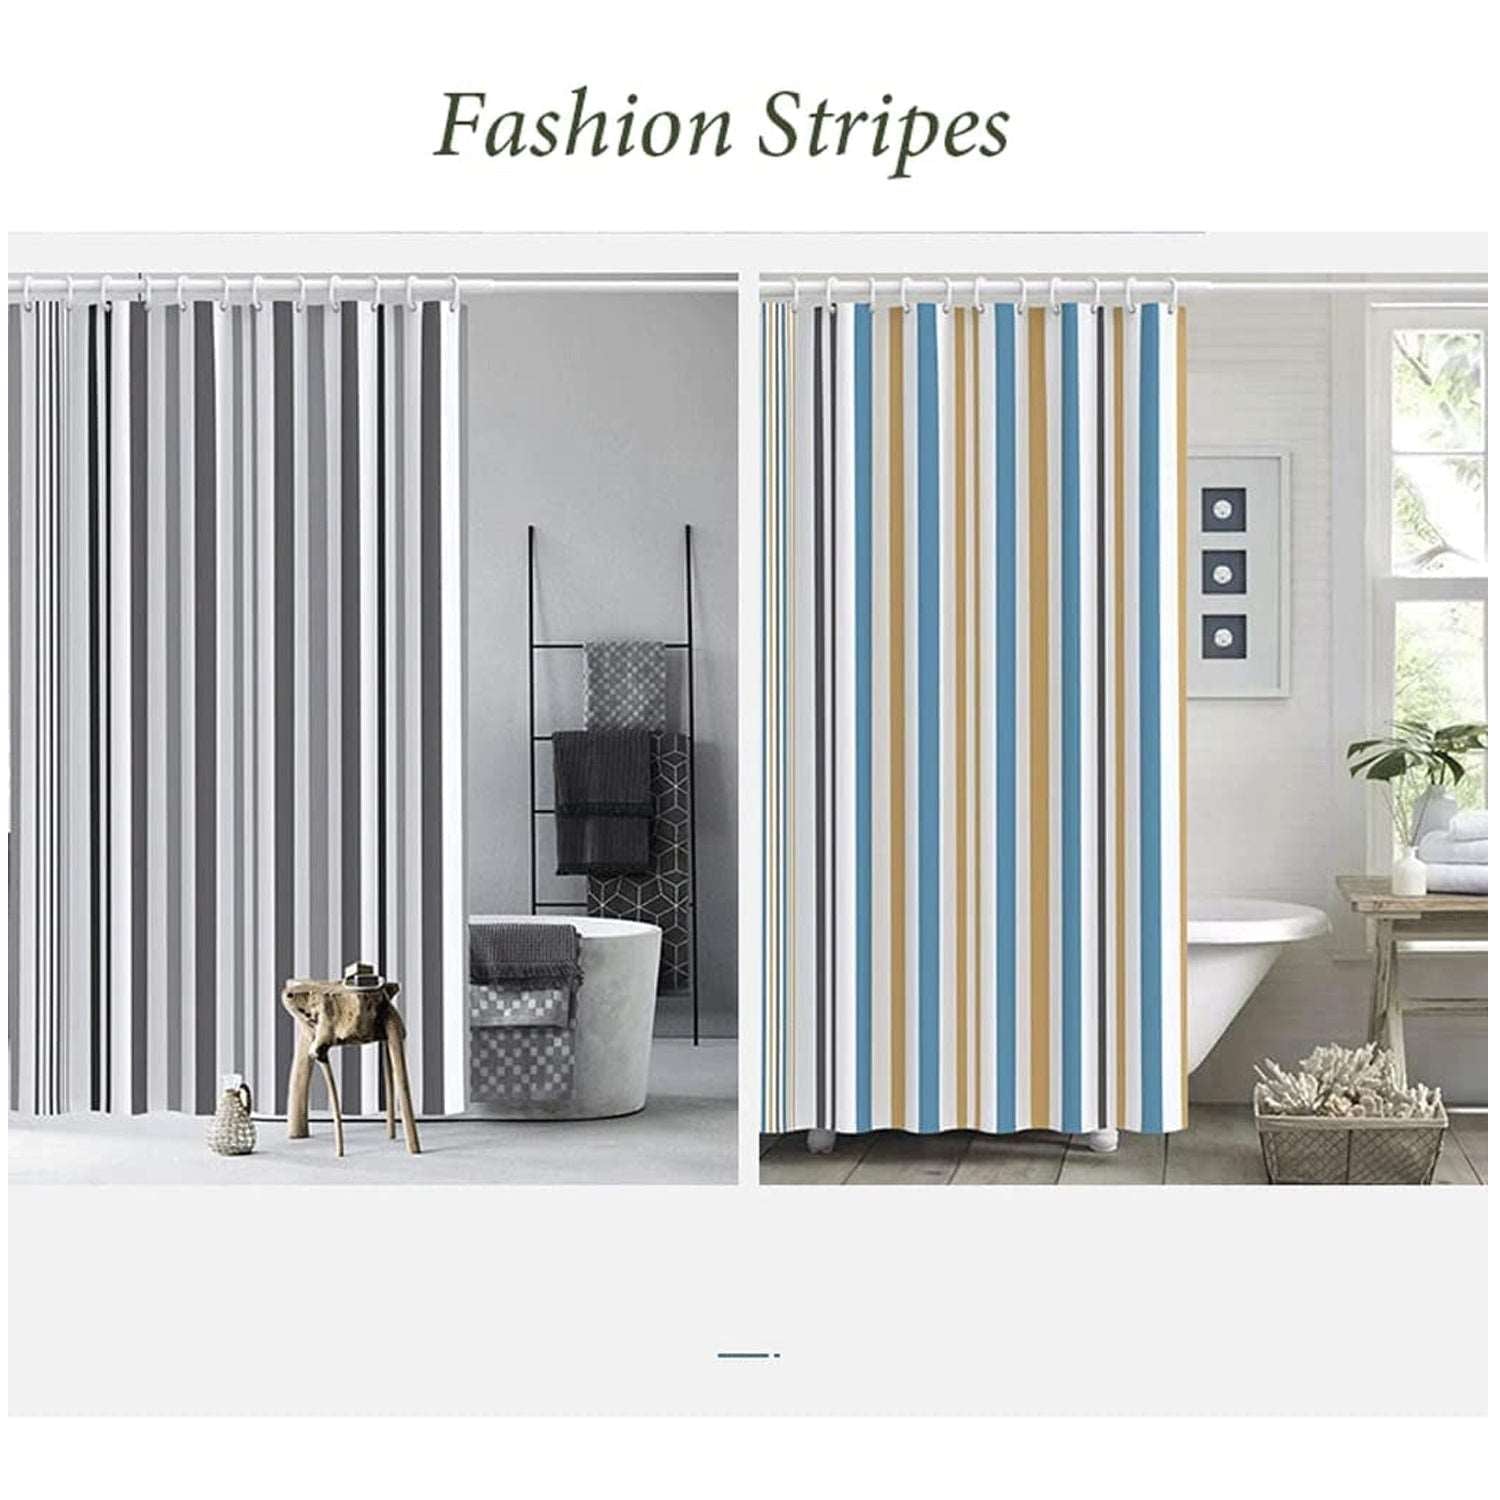 Bright Vertical Stripes in The Shower Curtain (150x180cm)